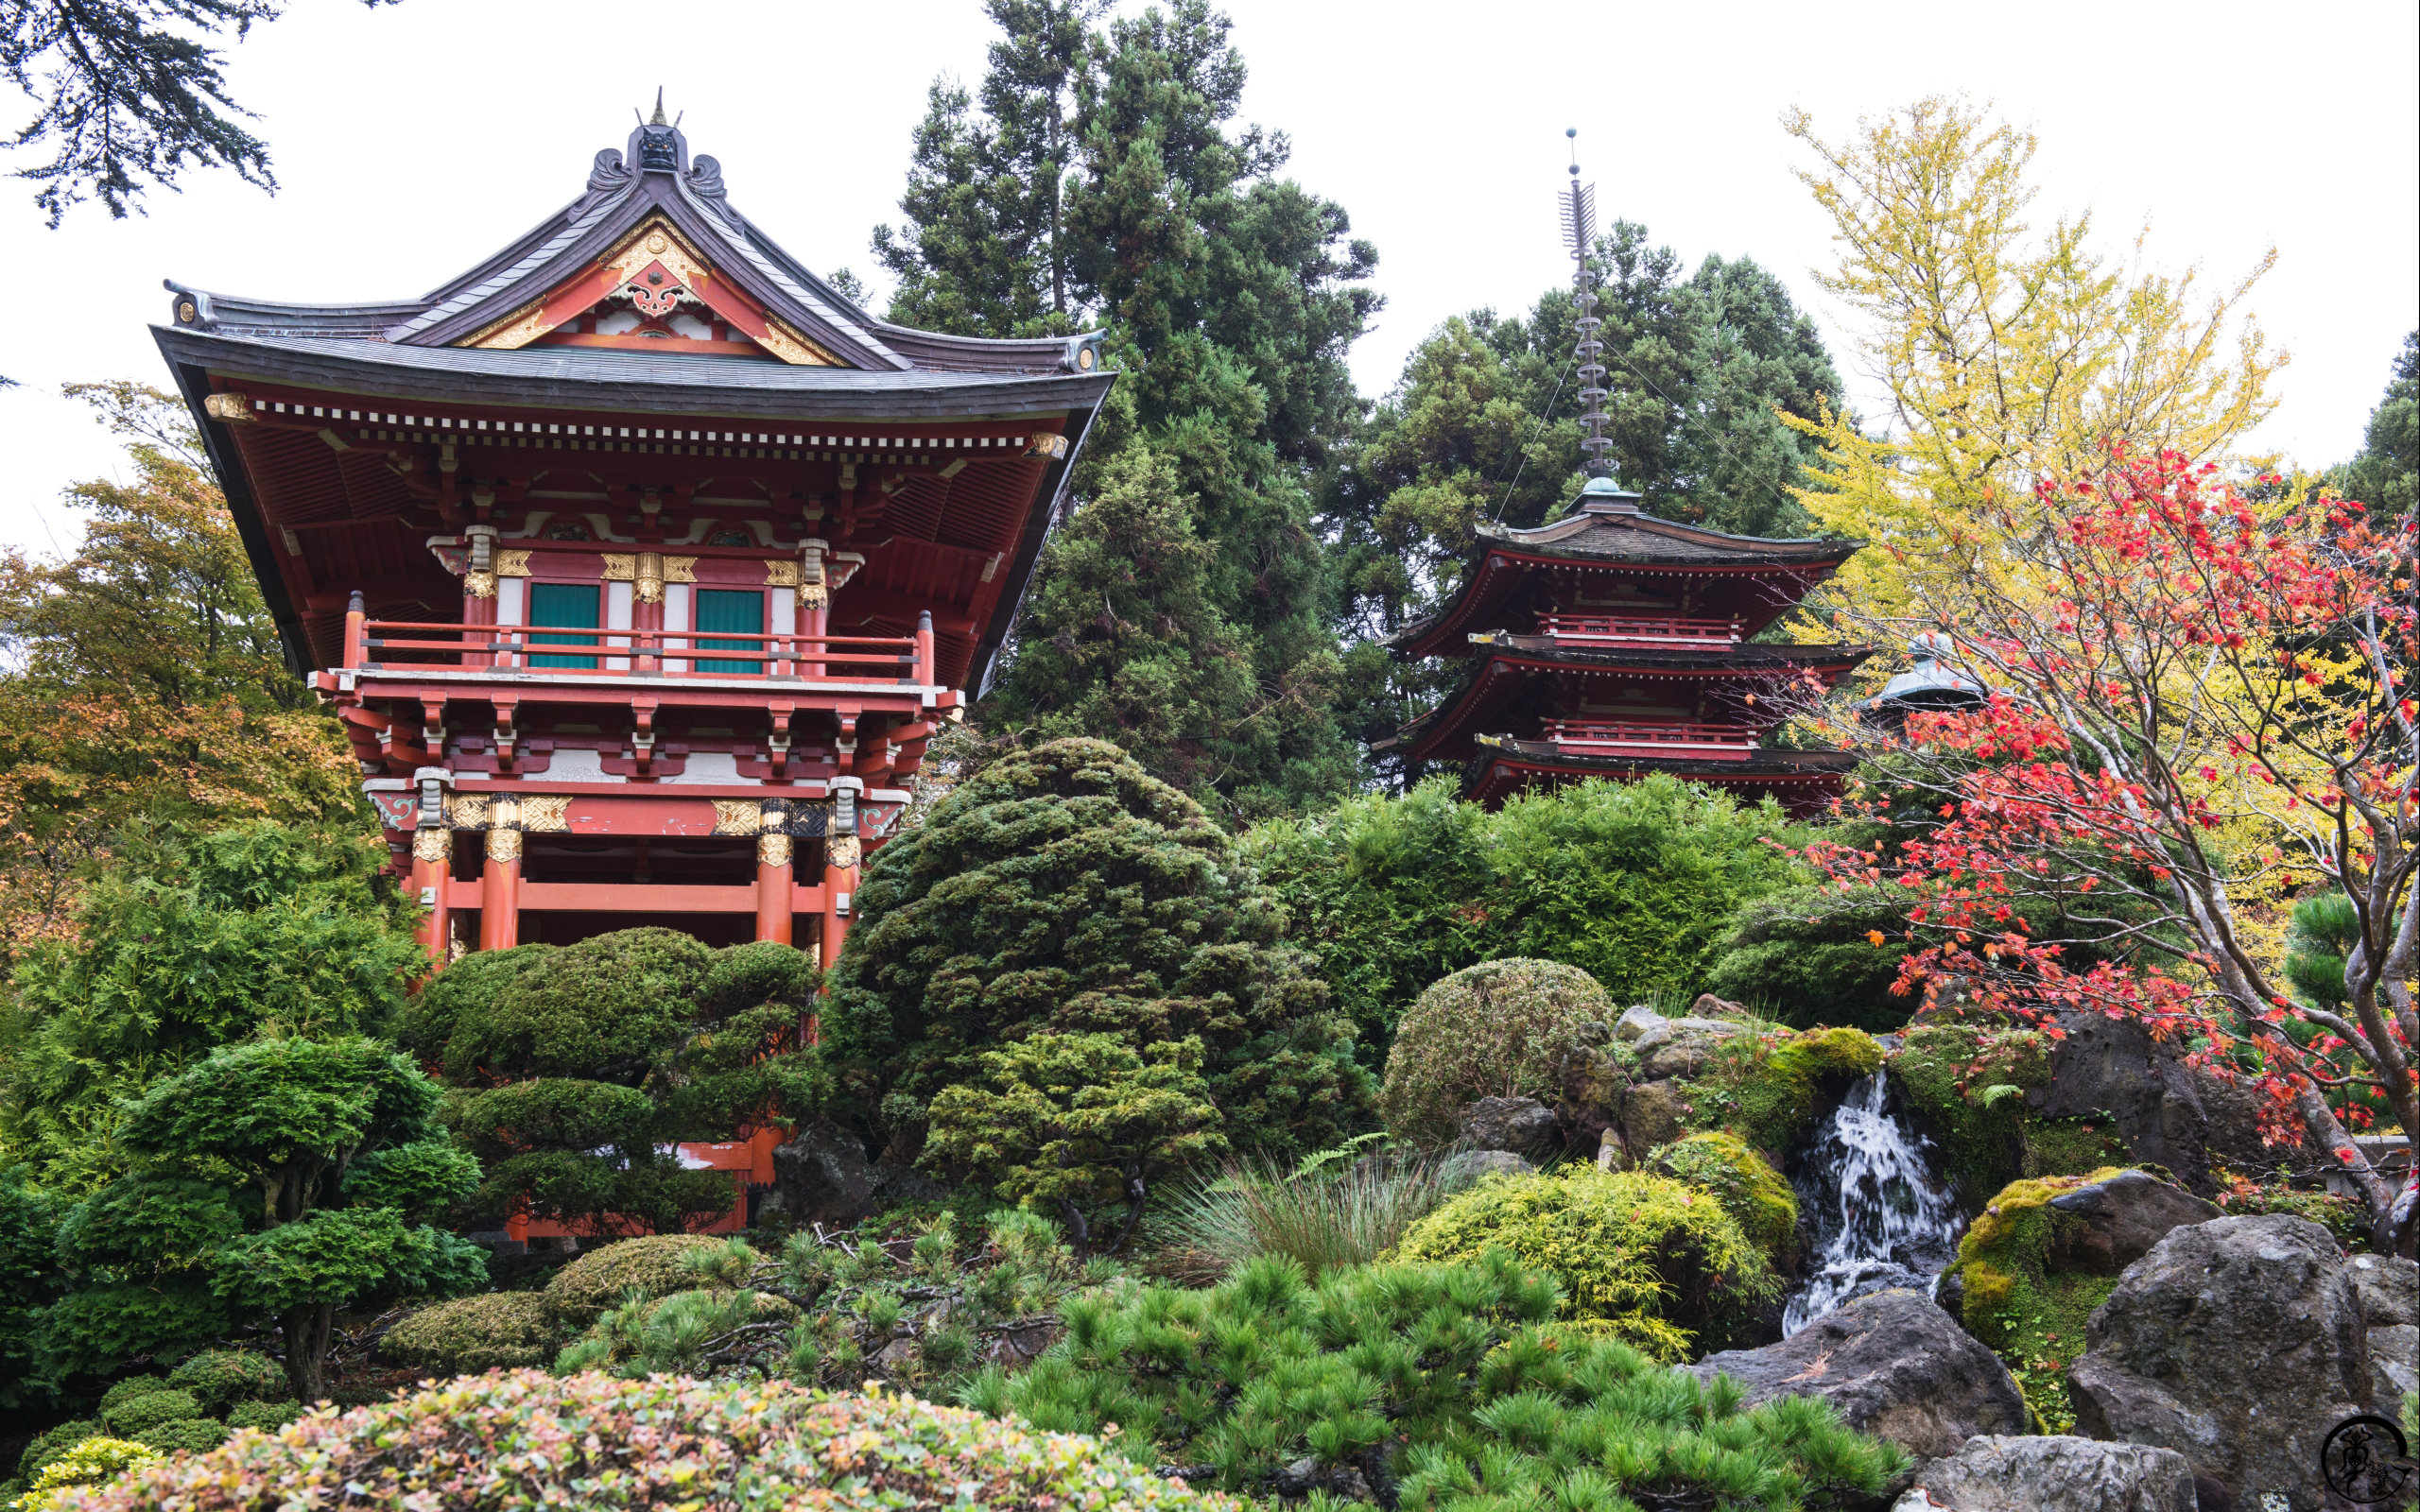 General 2560x1600 Japan pagoda pavilion red leaves architecture Asian architecture bushes Asia building garden plants